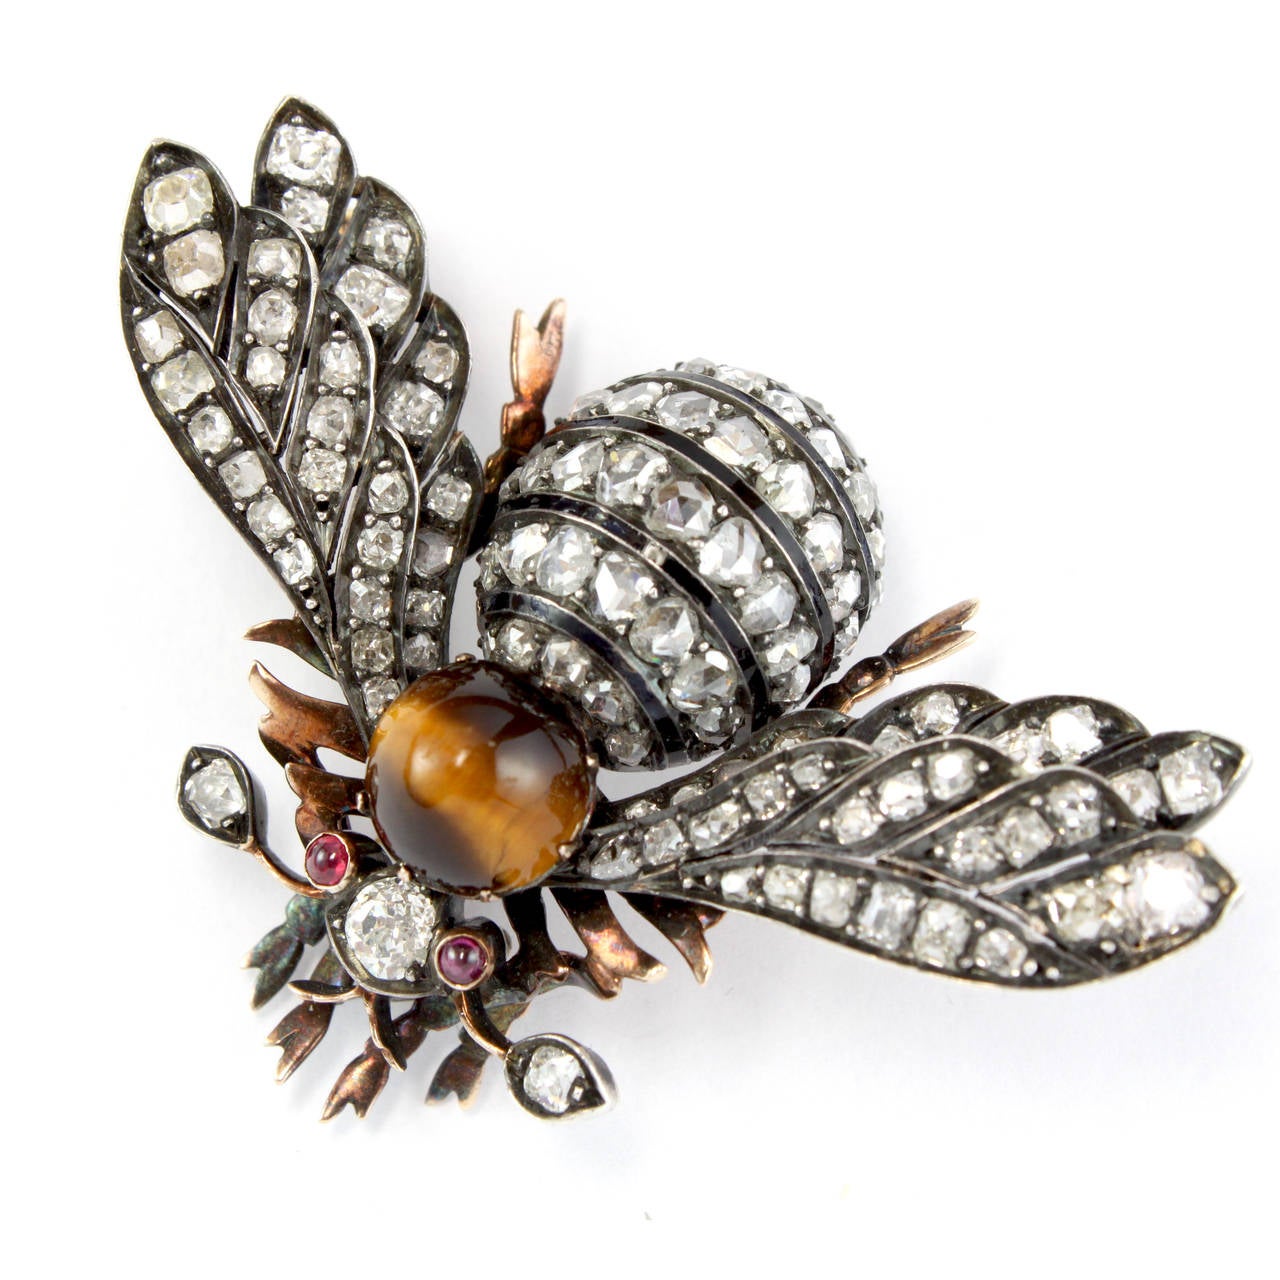 A beautiful jewellery broach in the form of a bumble bee, French 1880s.
The thorax is artistically studded with a tigereye, the eyes with two ruby cabochons and the rest of the body with old cut and rose cut diamonds. The center diamond weighs